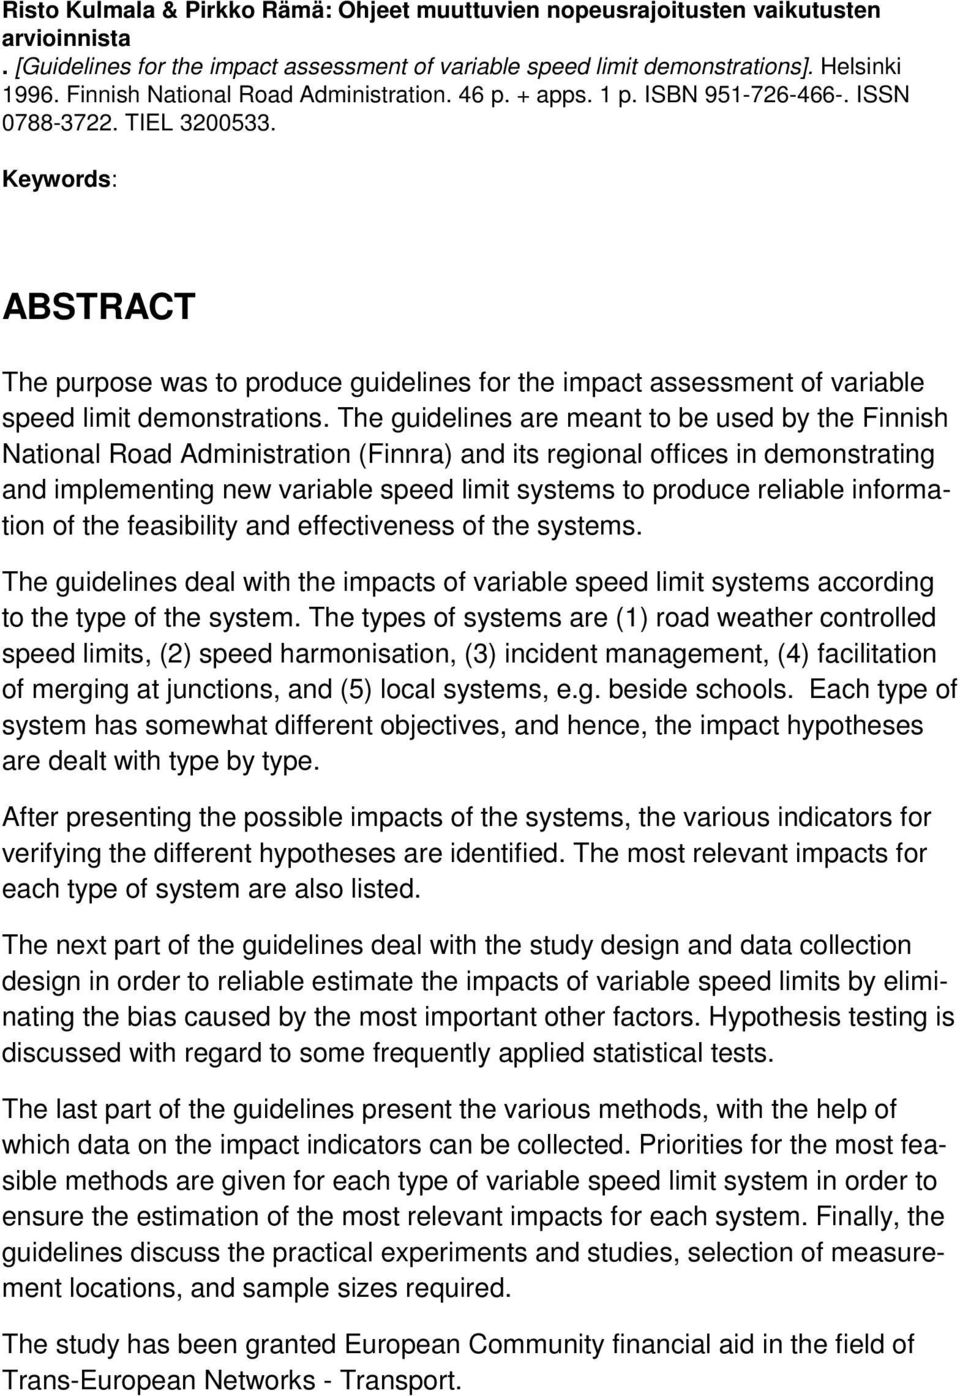 Keywords: ABSTRACT The purpose was to produce guidelines for the impact assessment of variable speed limit demonstrations.